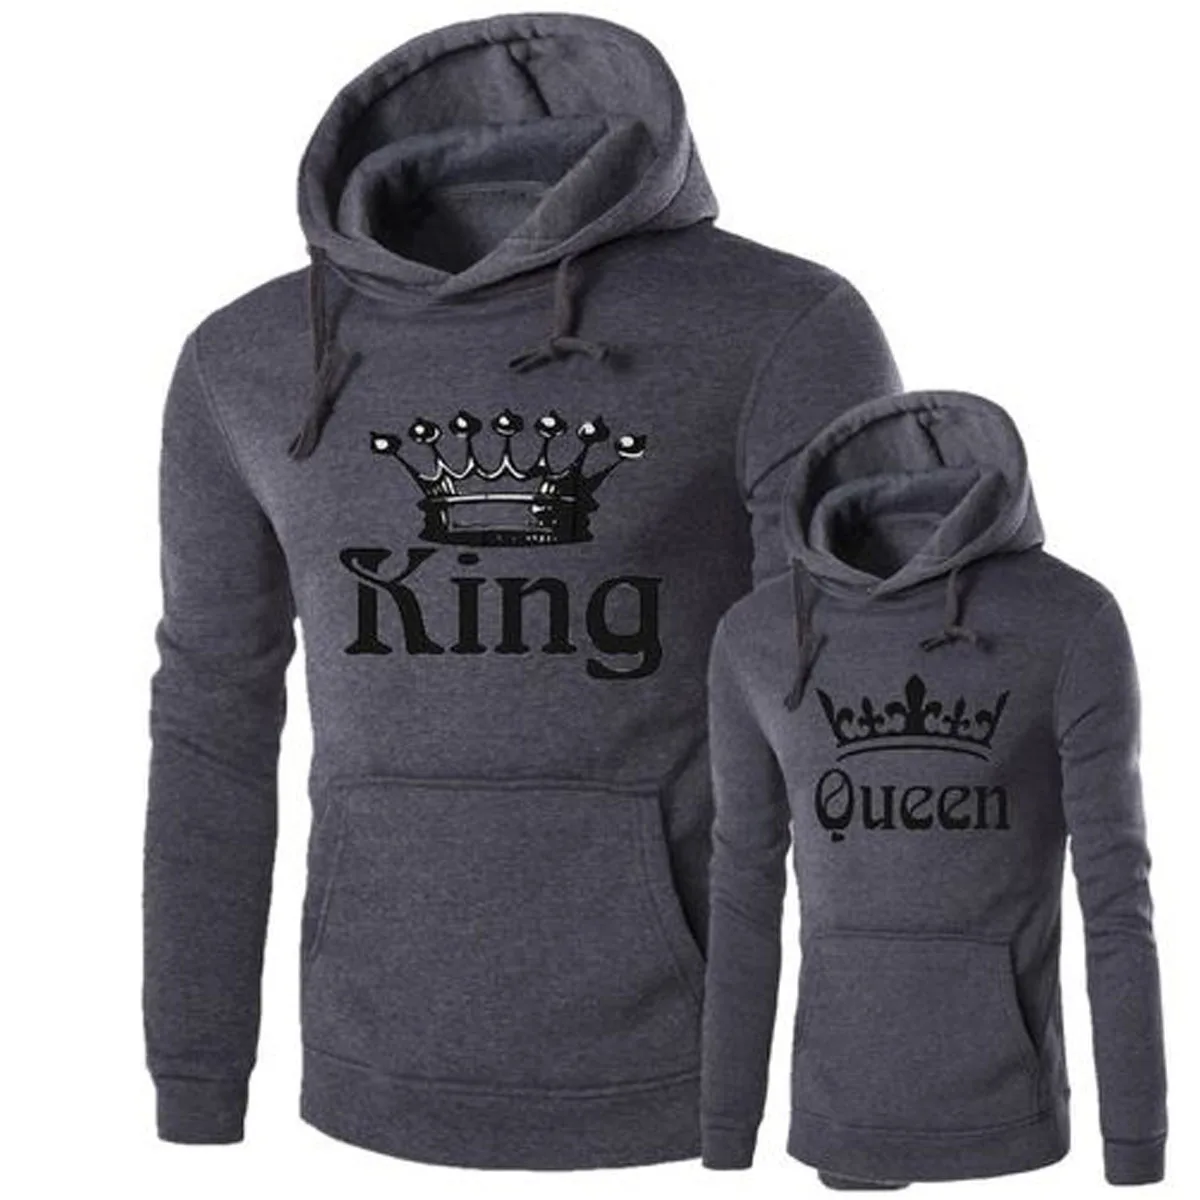 New Fashion Casual Hoodies Sweatshirt Couples Hooded Pullover Hoodies Print King Queen Spring Winter Tops Men/Women Clothing